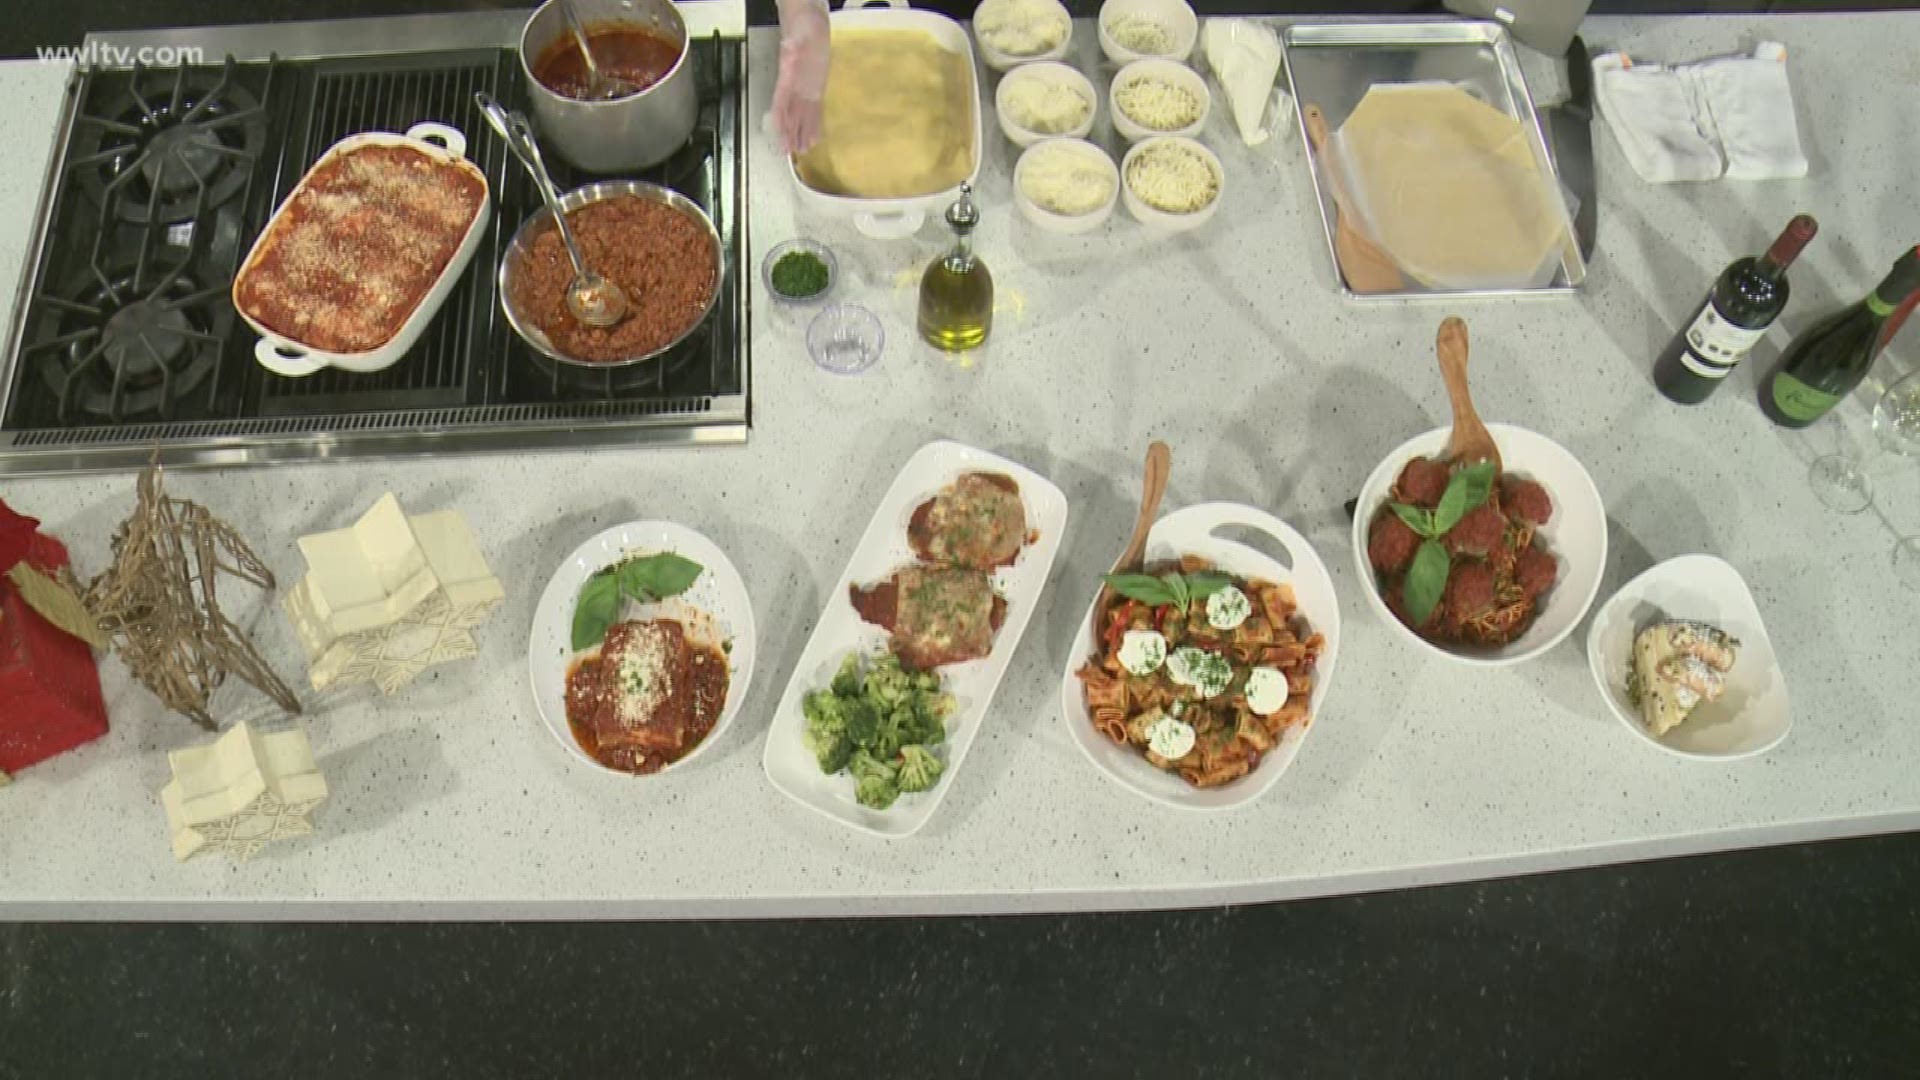 Chef Kyle Barnett with Carrabba's Italian Grill is showing us how to make a delicious holiday Lasagna.